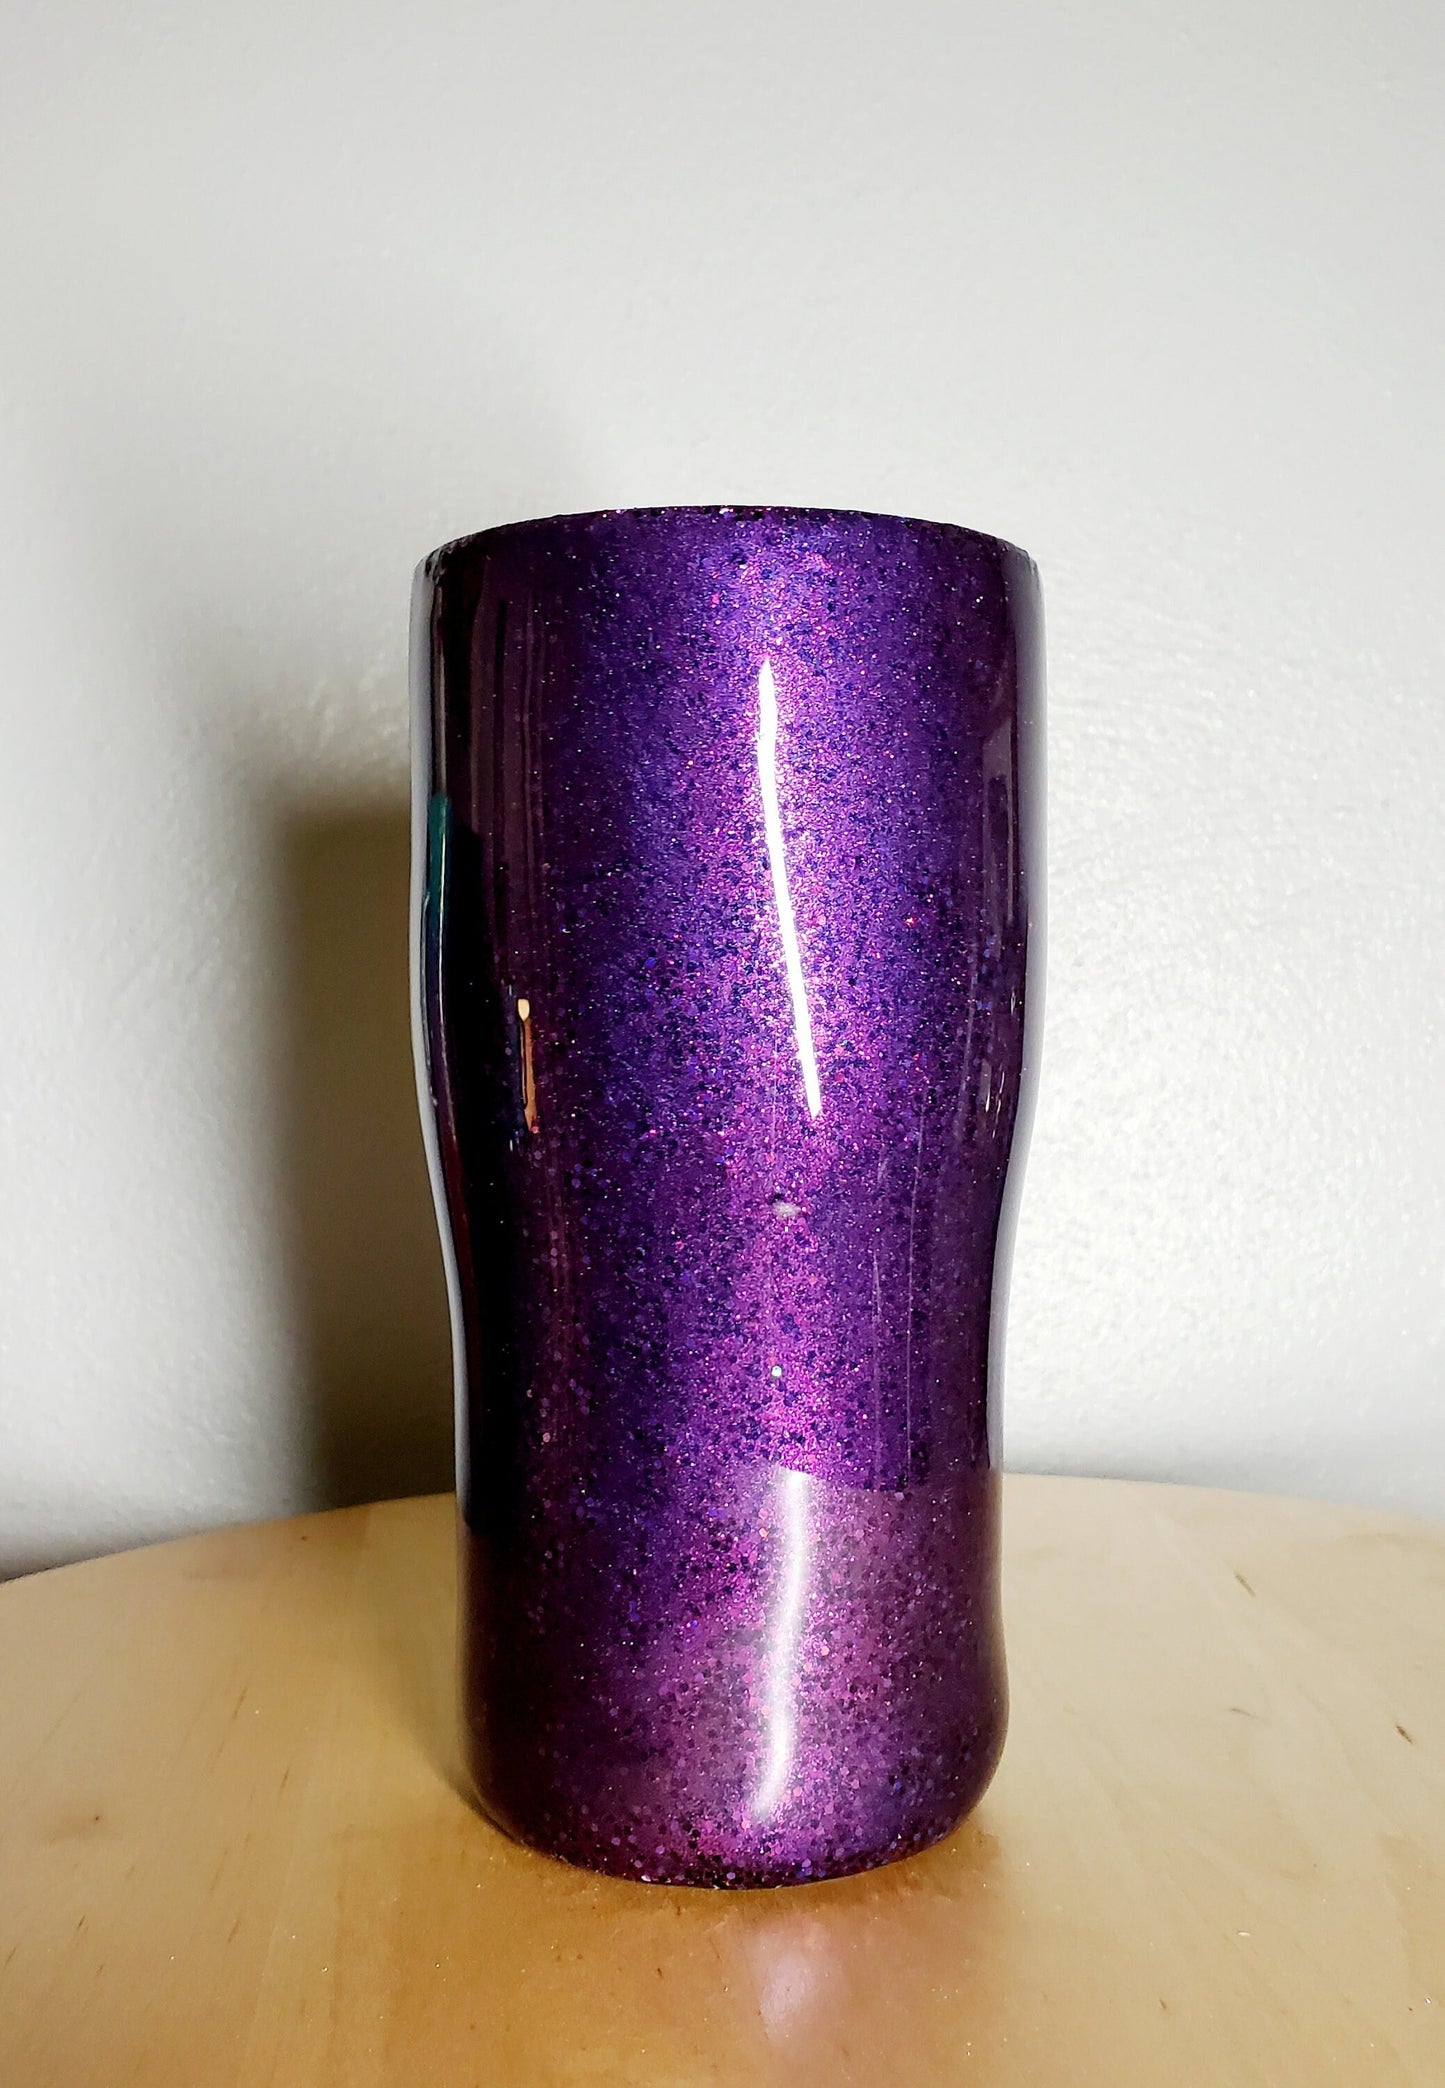 You Personalize it We're All Mad Here Purple Glitter and Mica Powder Custom Personalized Epoxy Resin Tumbler